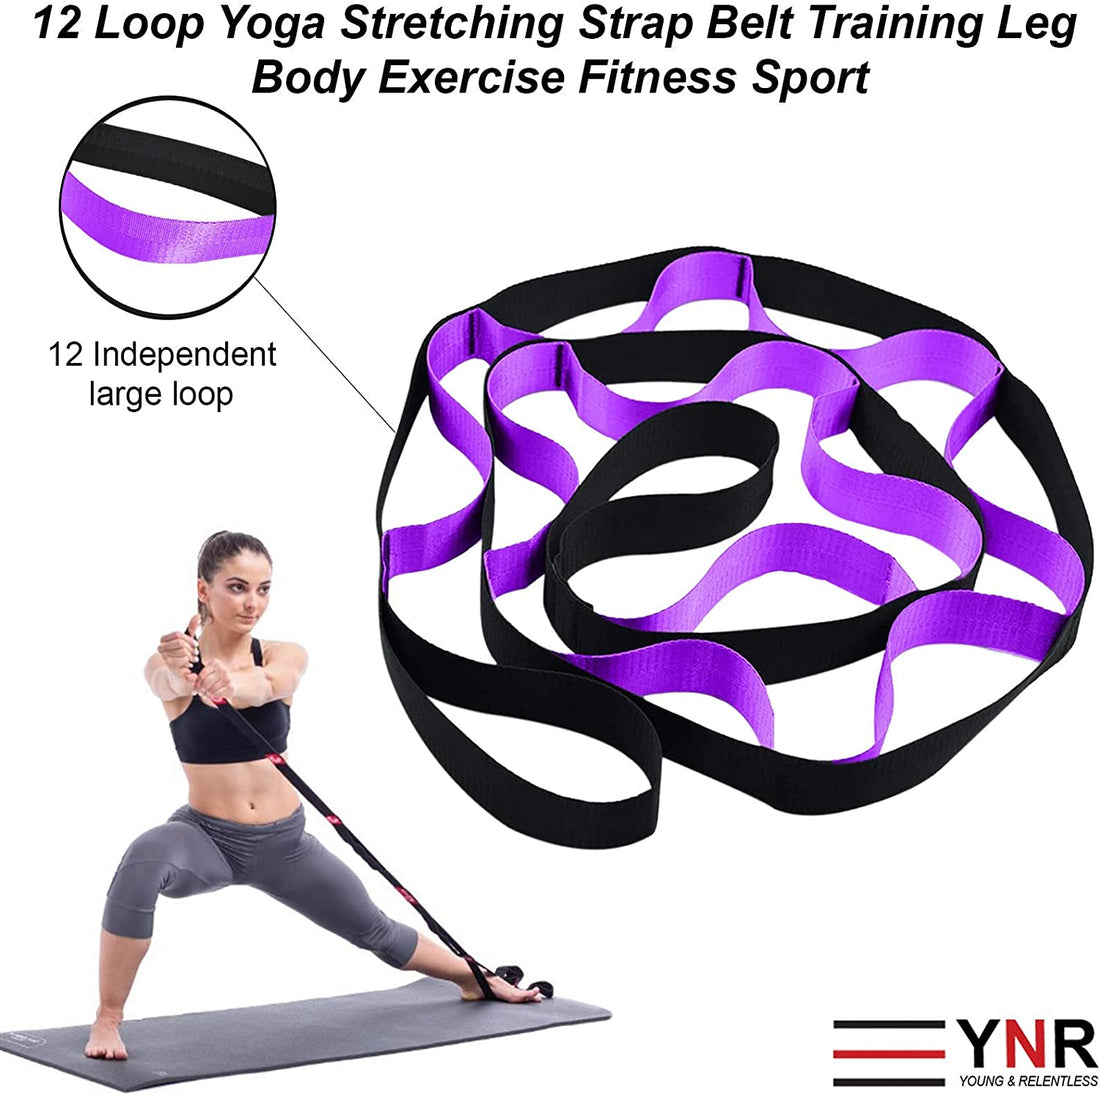 Yoga Strap Stretching Bands With Loops - Stretch Out Strap Pilates Bands Workout Straps - Exercise Loop Bands for Rehab, Yoga, Pilates, Dance, Ballet, Gymnastics, Leg, and Back Stretcher(Black-Purple)